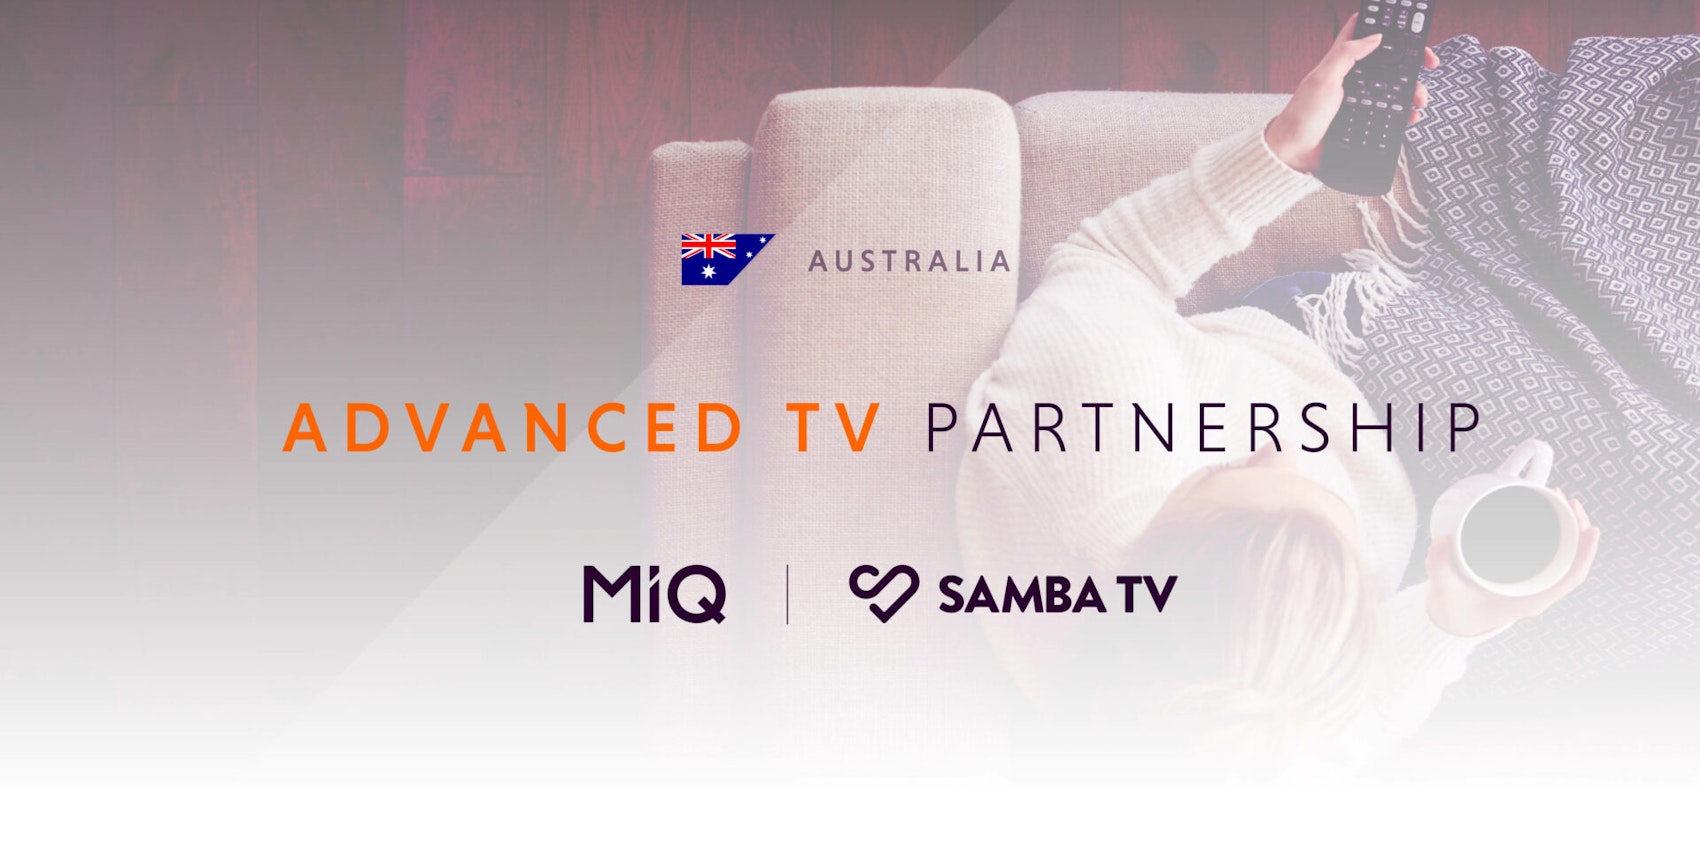 MiQ and Samba TV partner to help marketers harness the power of Advanced TV in Australia